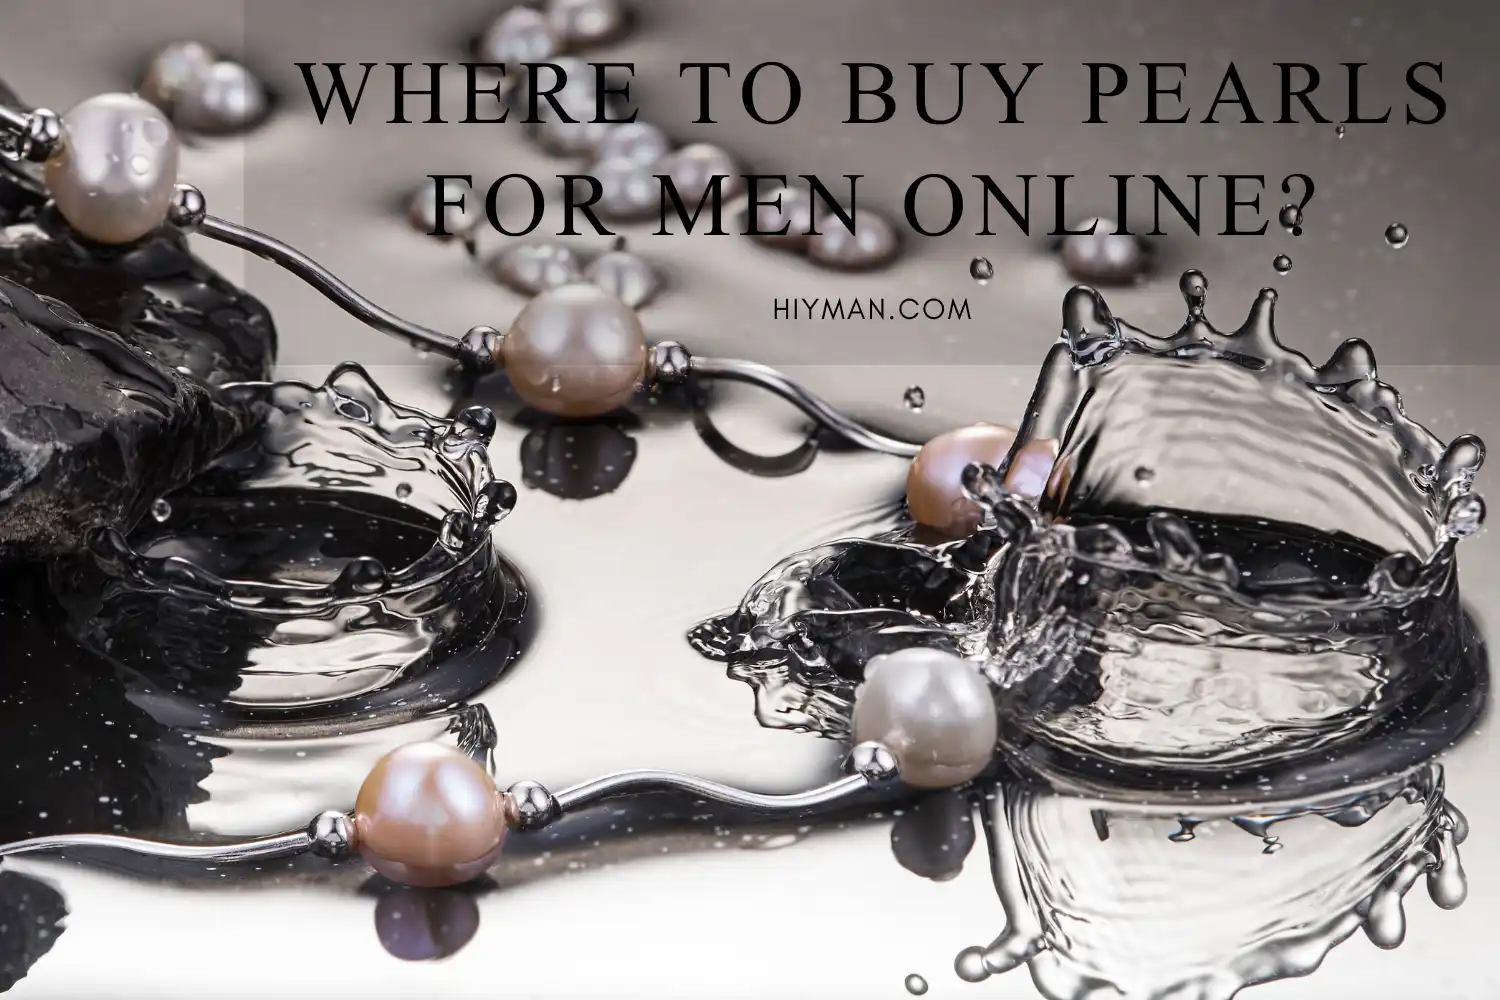 Where to Buy Pearls for Men Online?